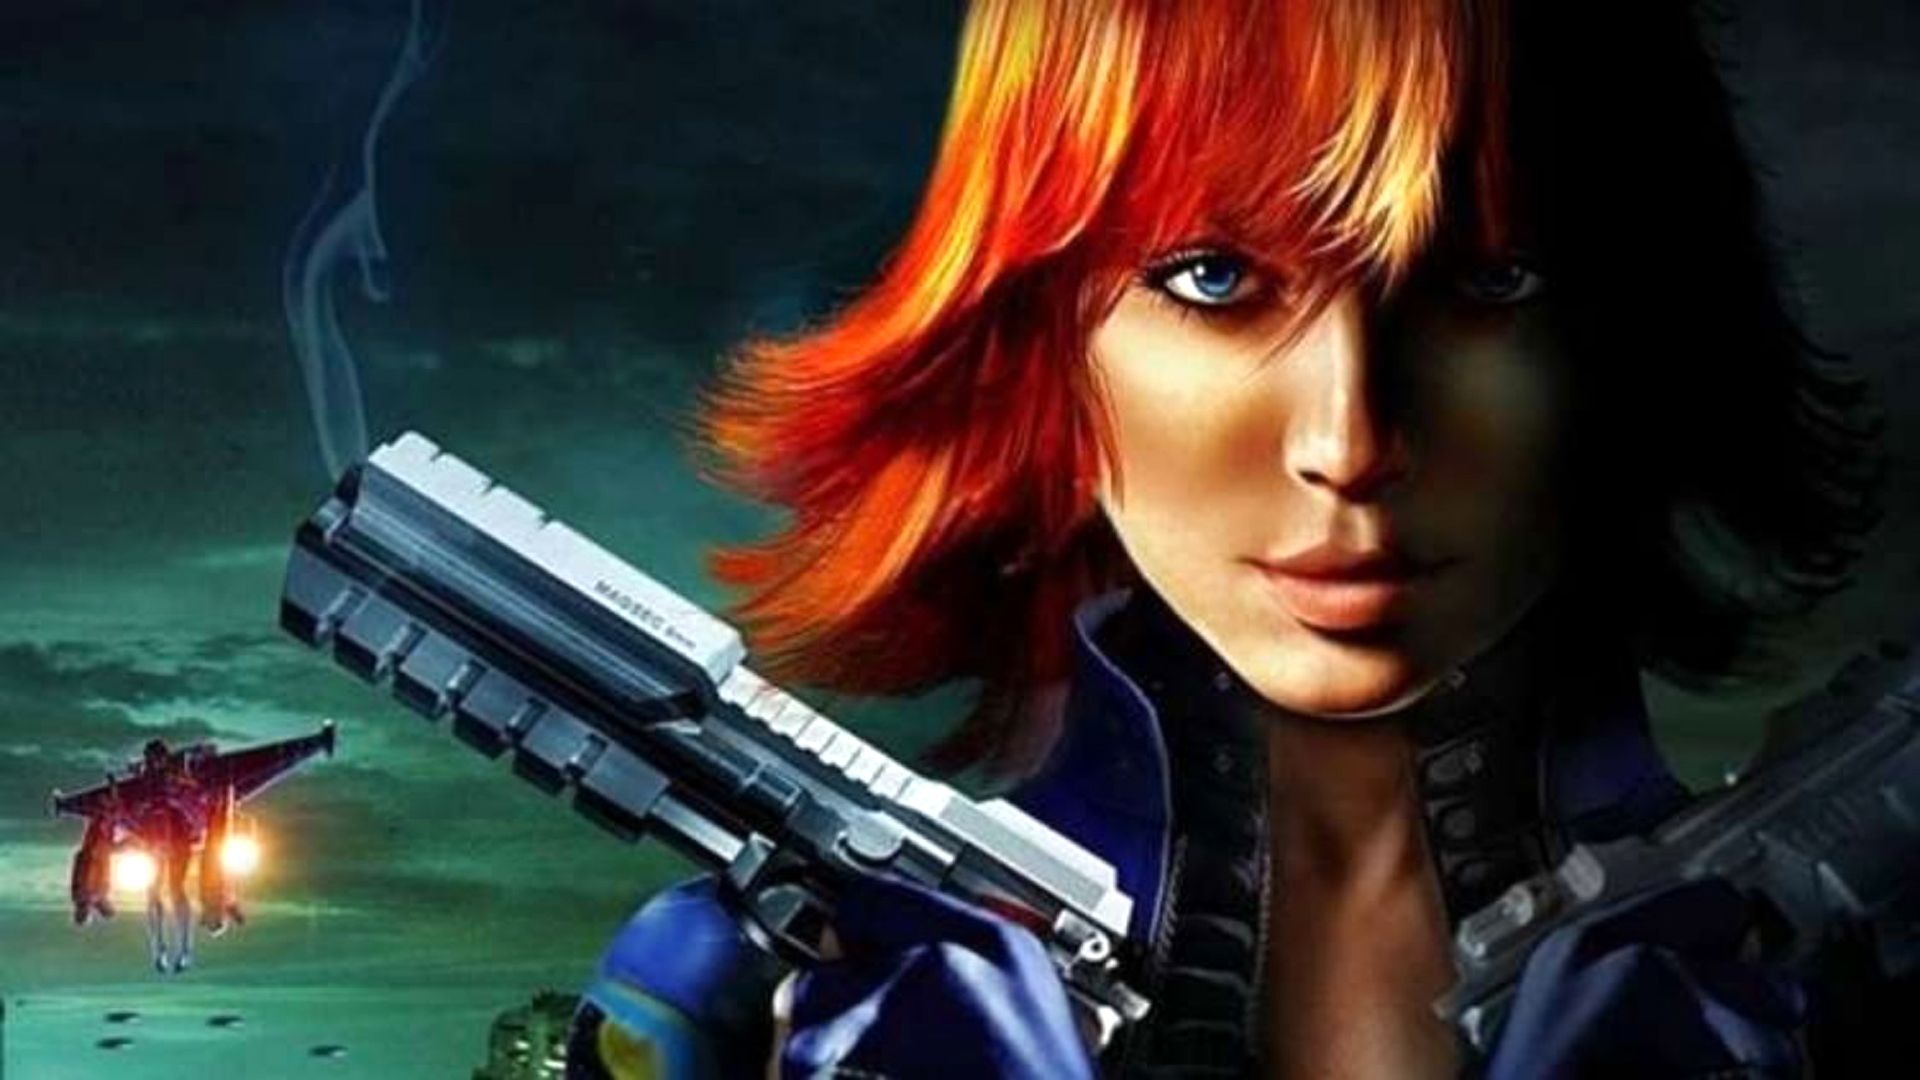 Xbox head: “it’s awesome” that Perfect Dark gives them another female lead